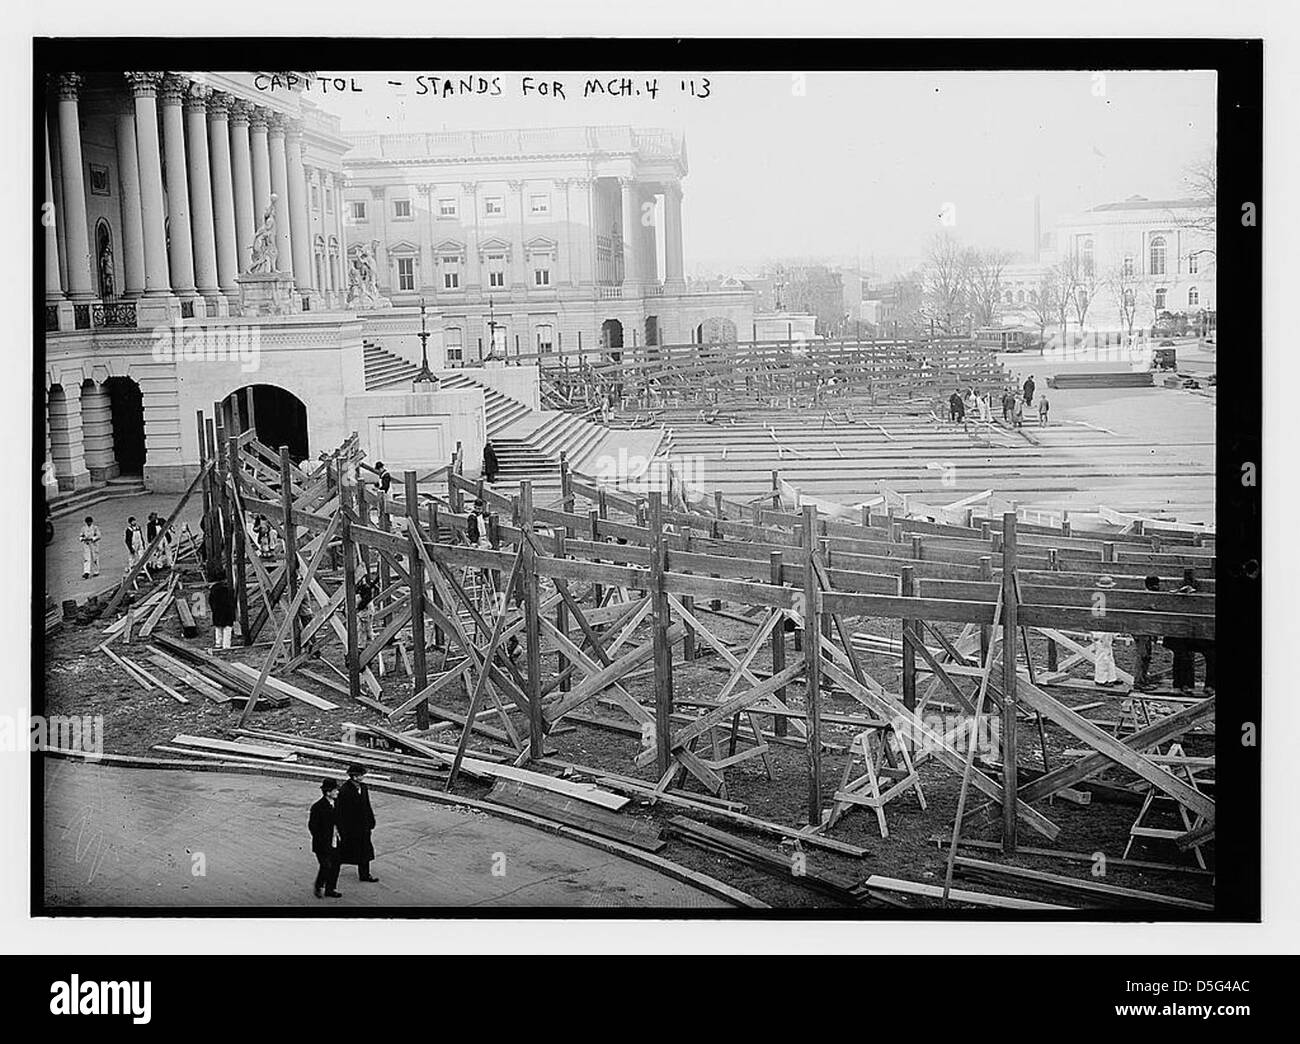 Capitol - stands for Inaug. (LOC) Stock Photo